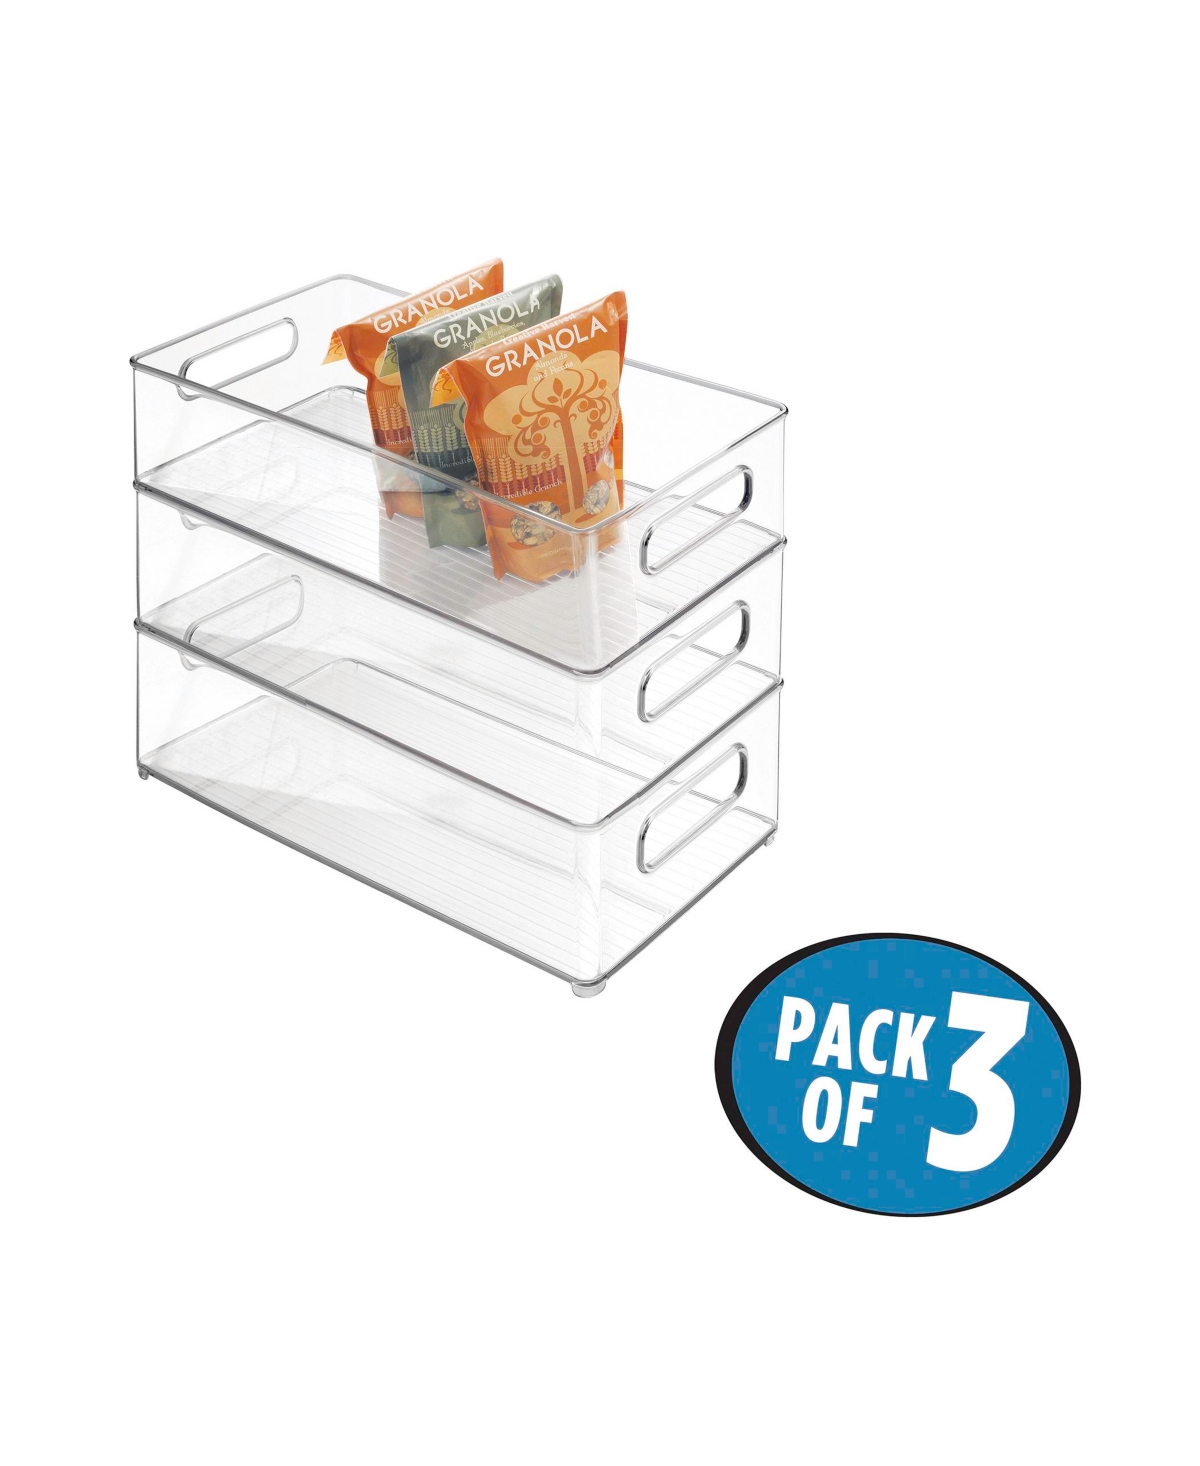 Idesign Plastic Refrigerator And Freezer Storage Bin With Lid, Set Of 3 In No Color